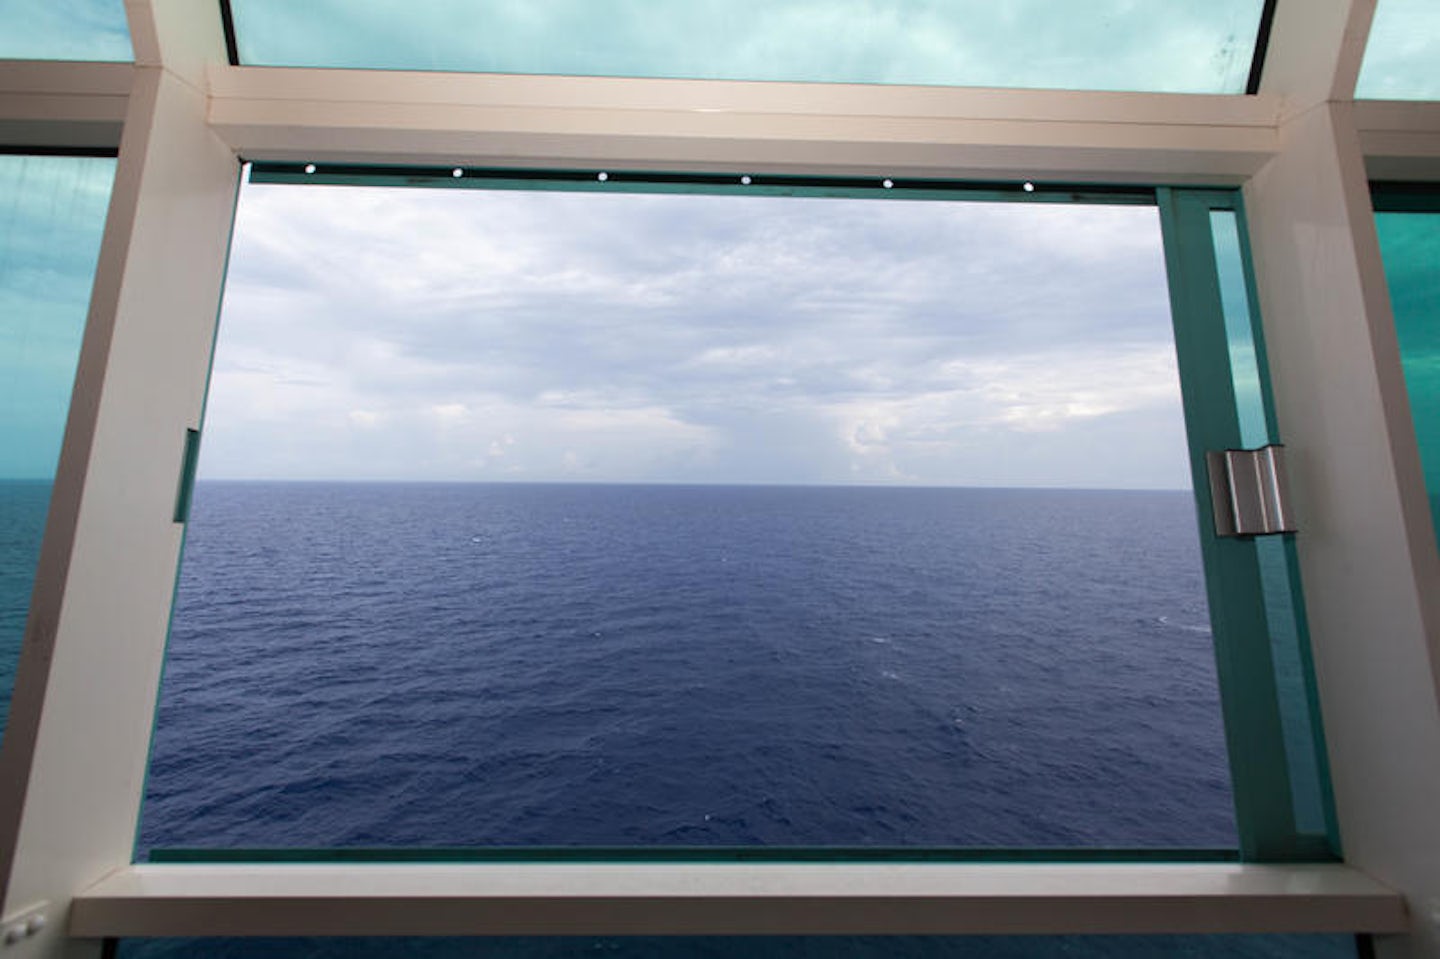 Sea Views on Independence of the Seas